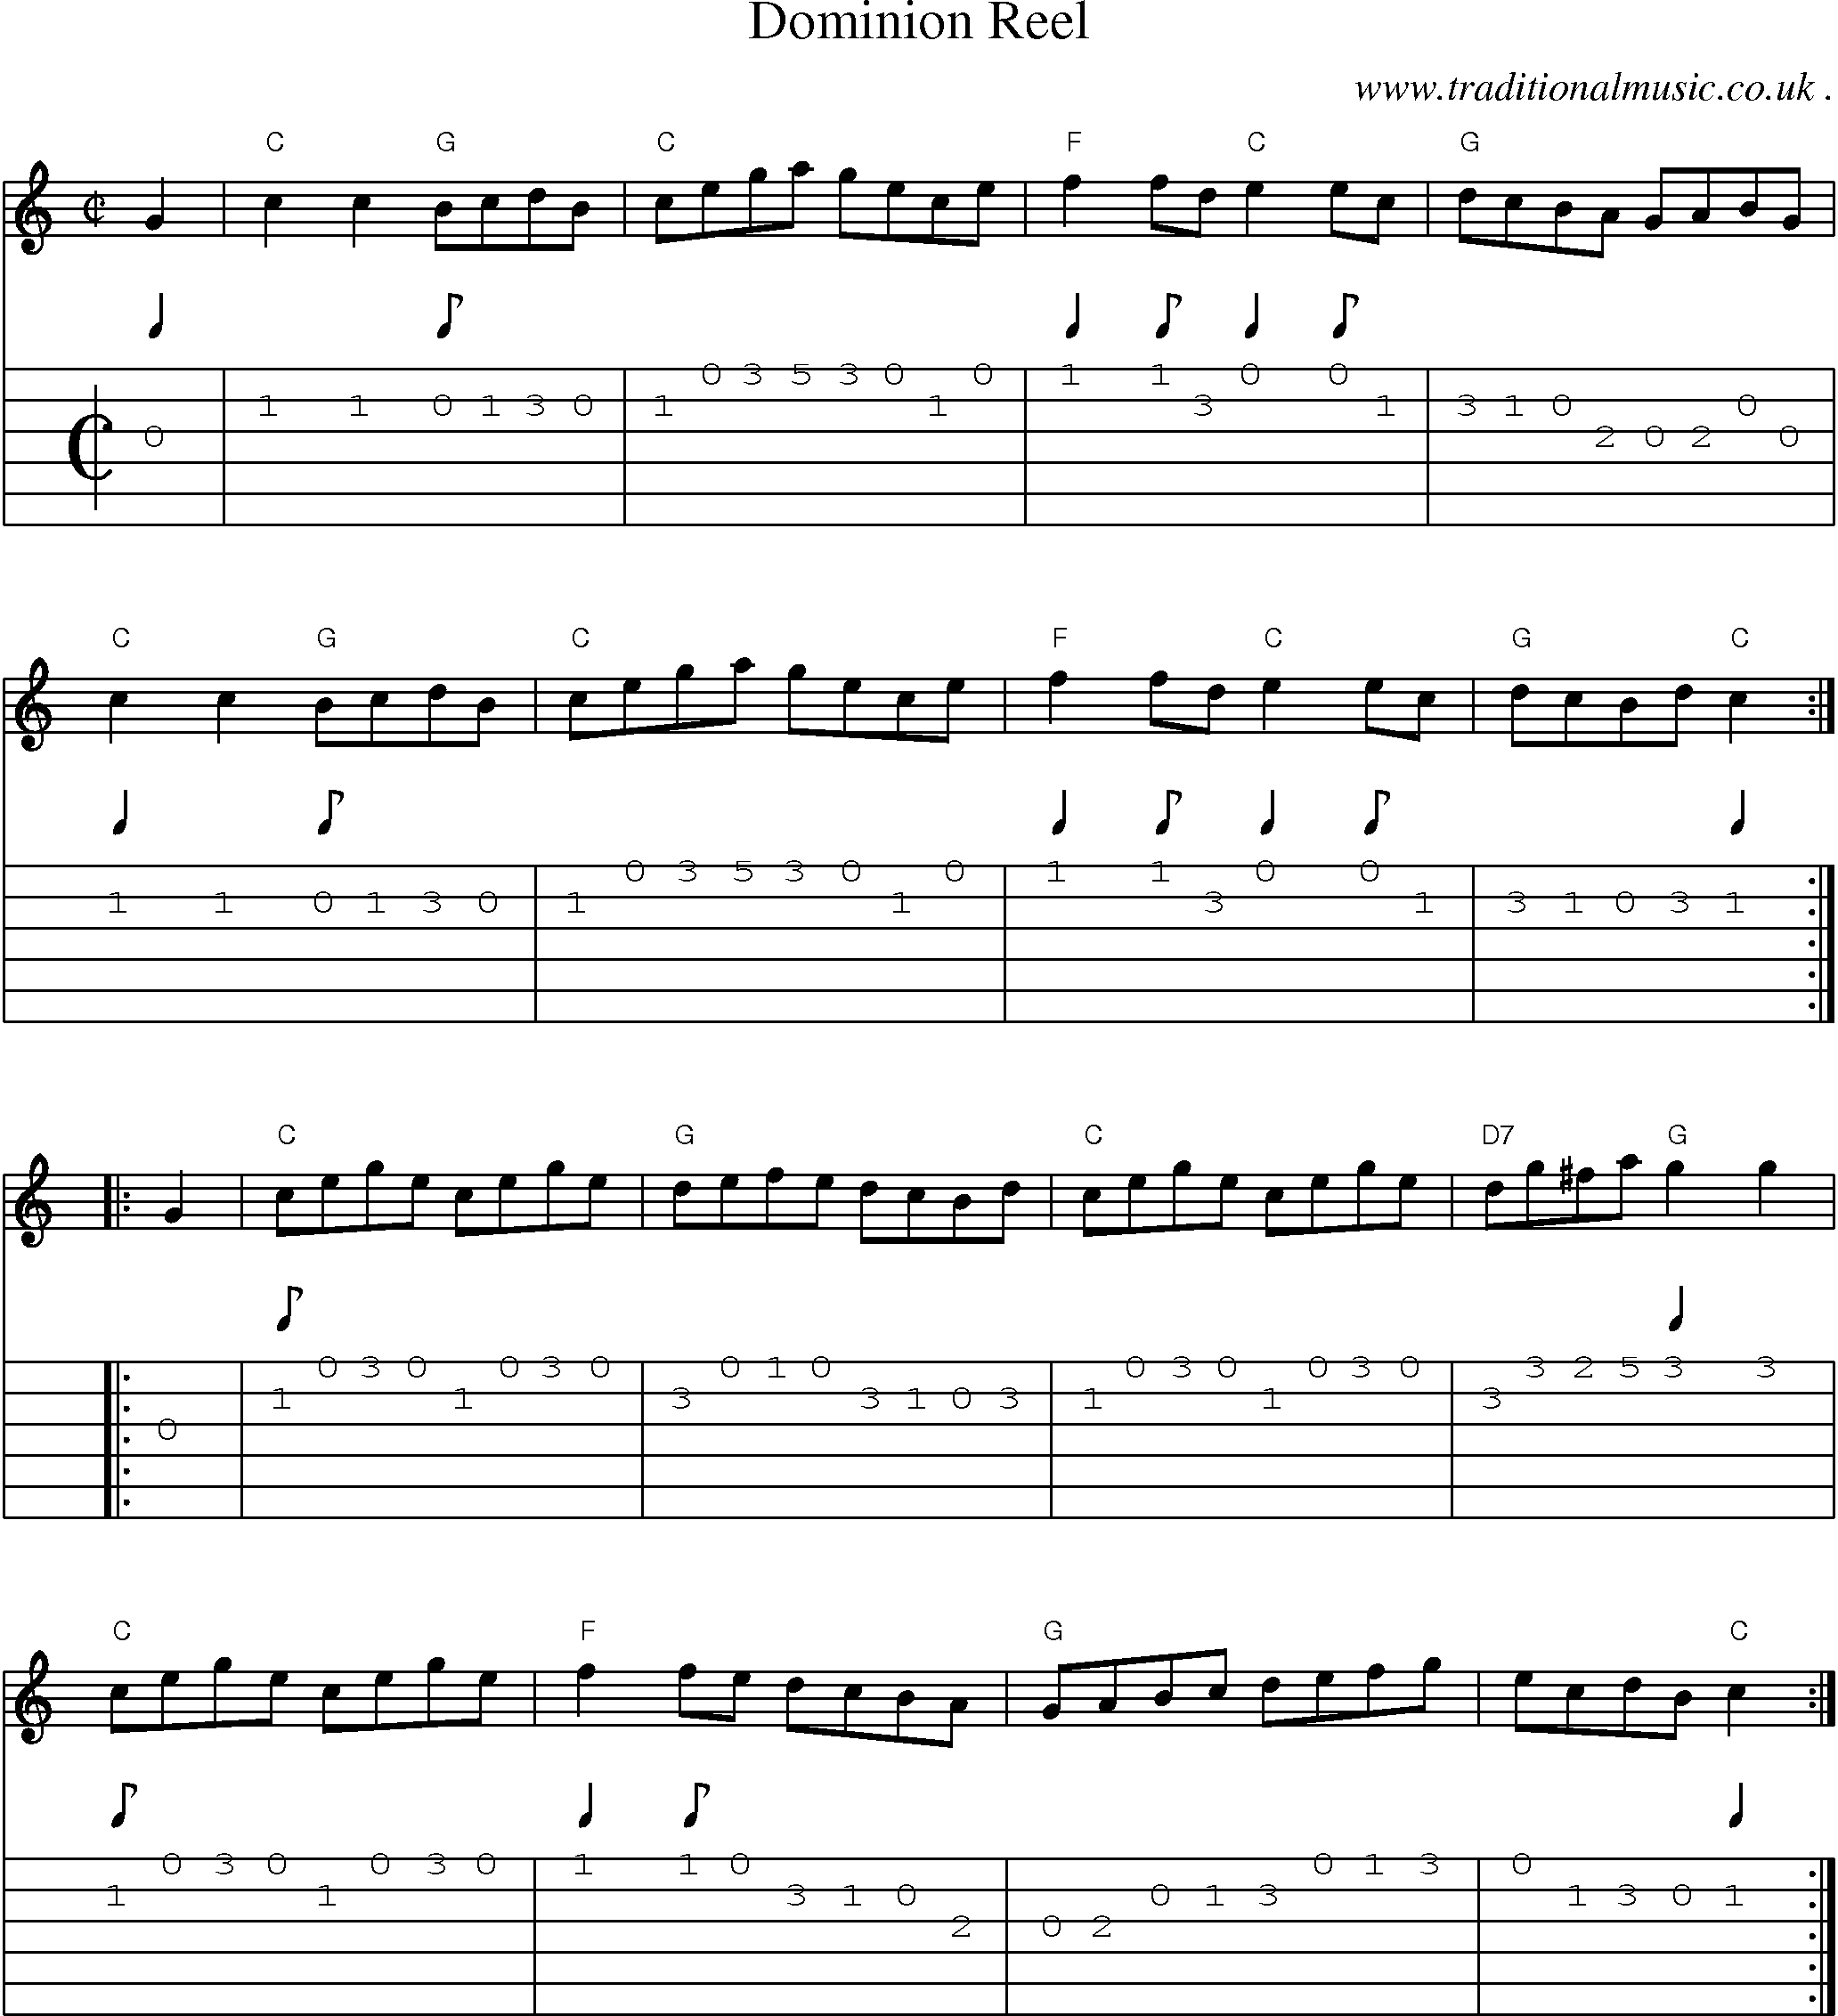 Music Score and Guitar Tabs for Dominion Reel